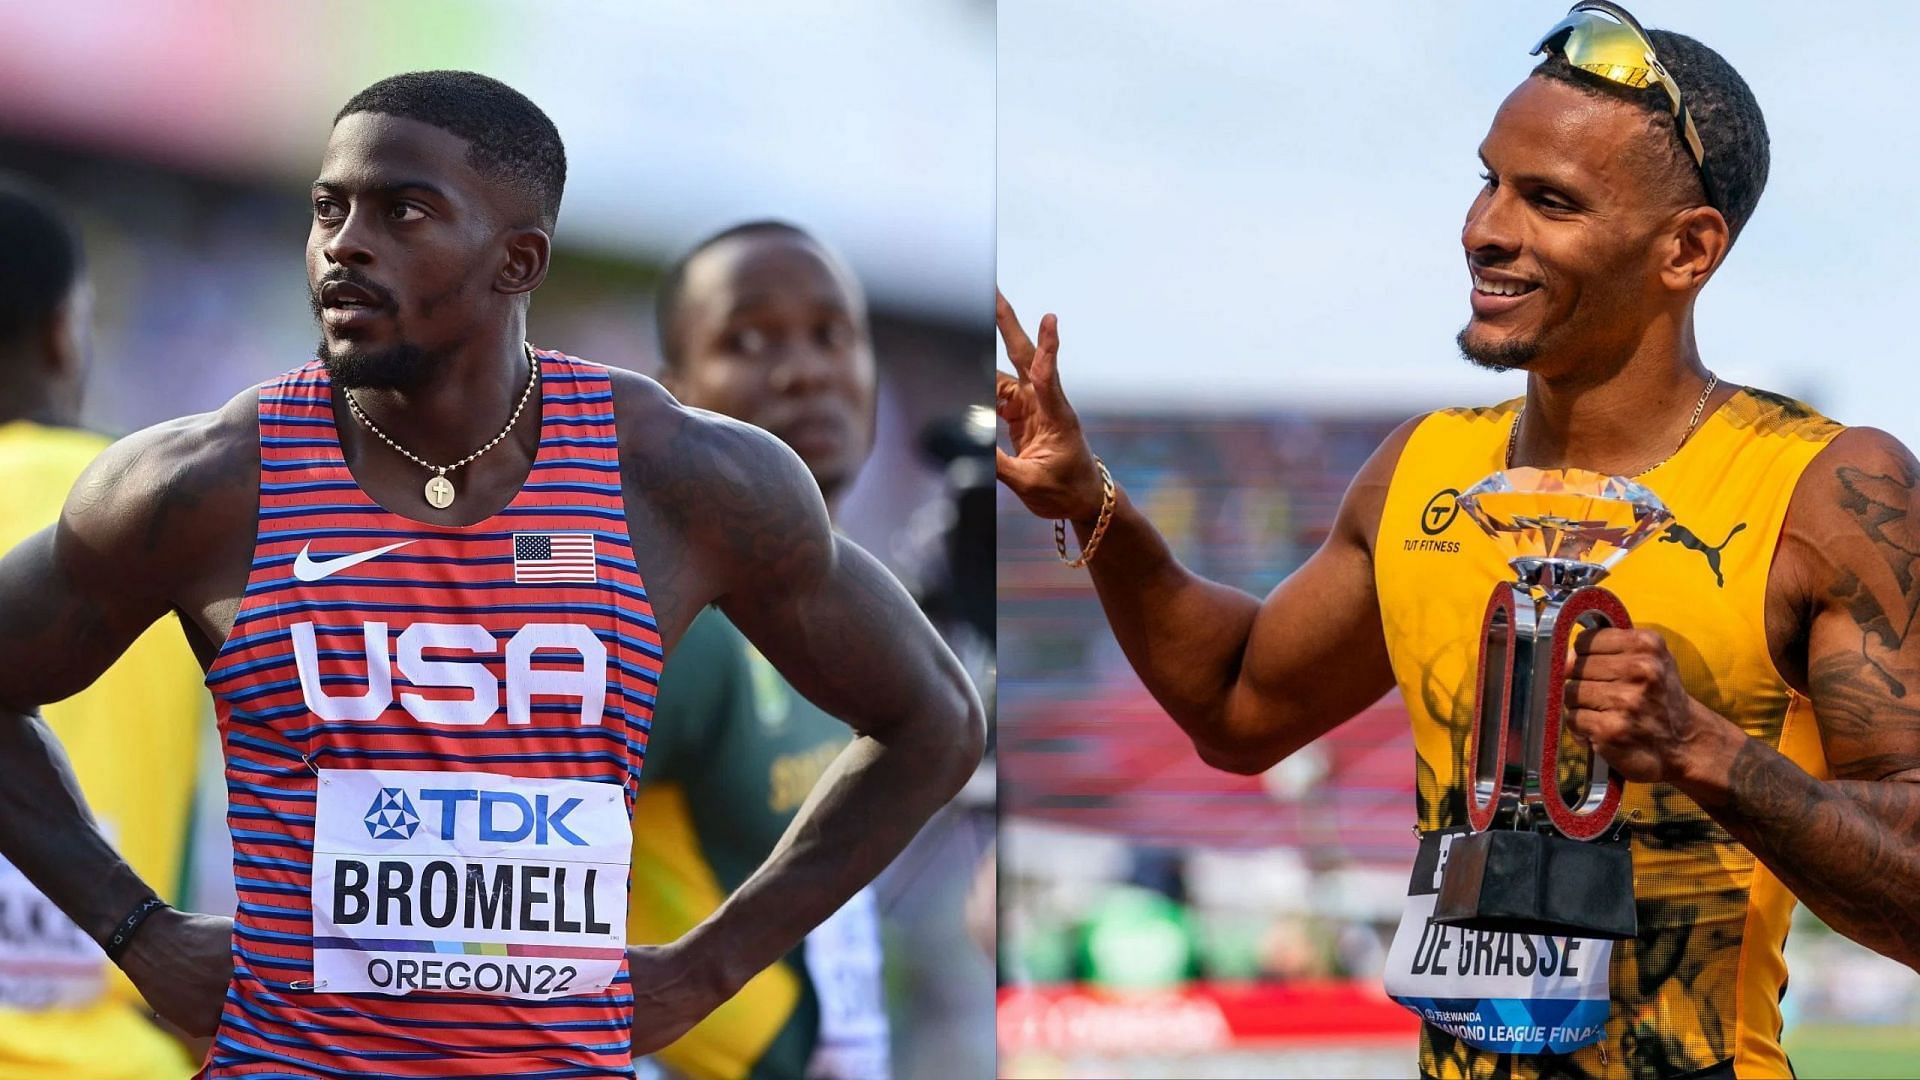 Trayvon Bromell and Andre De Grasse